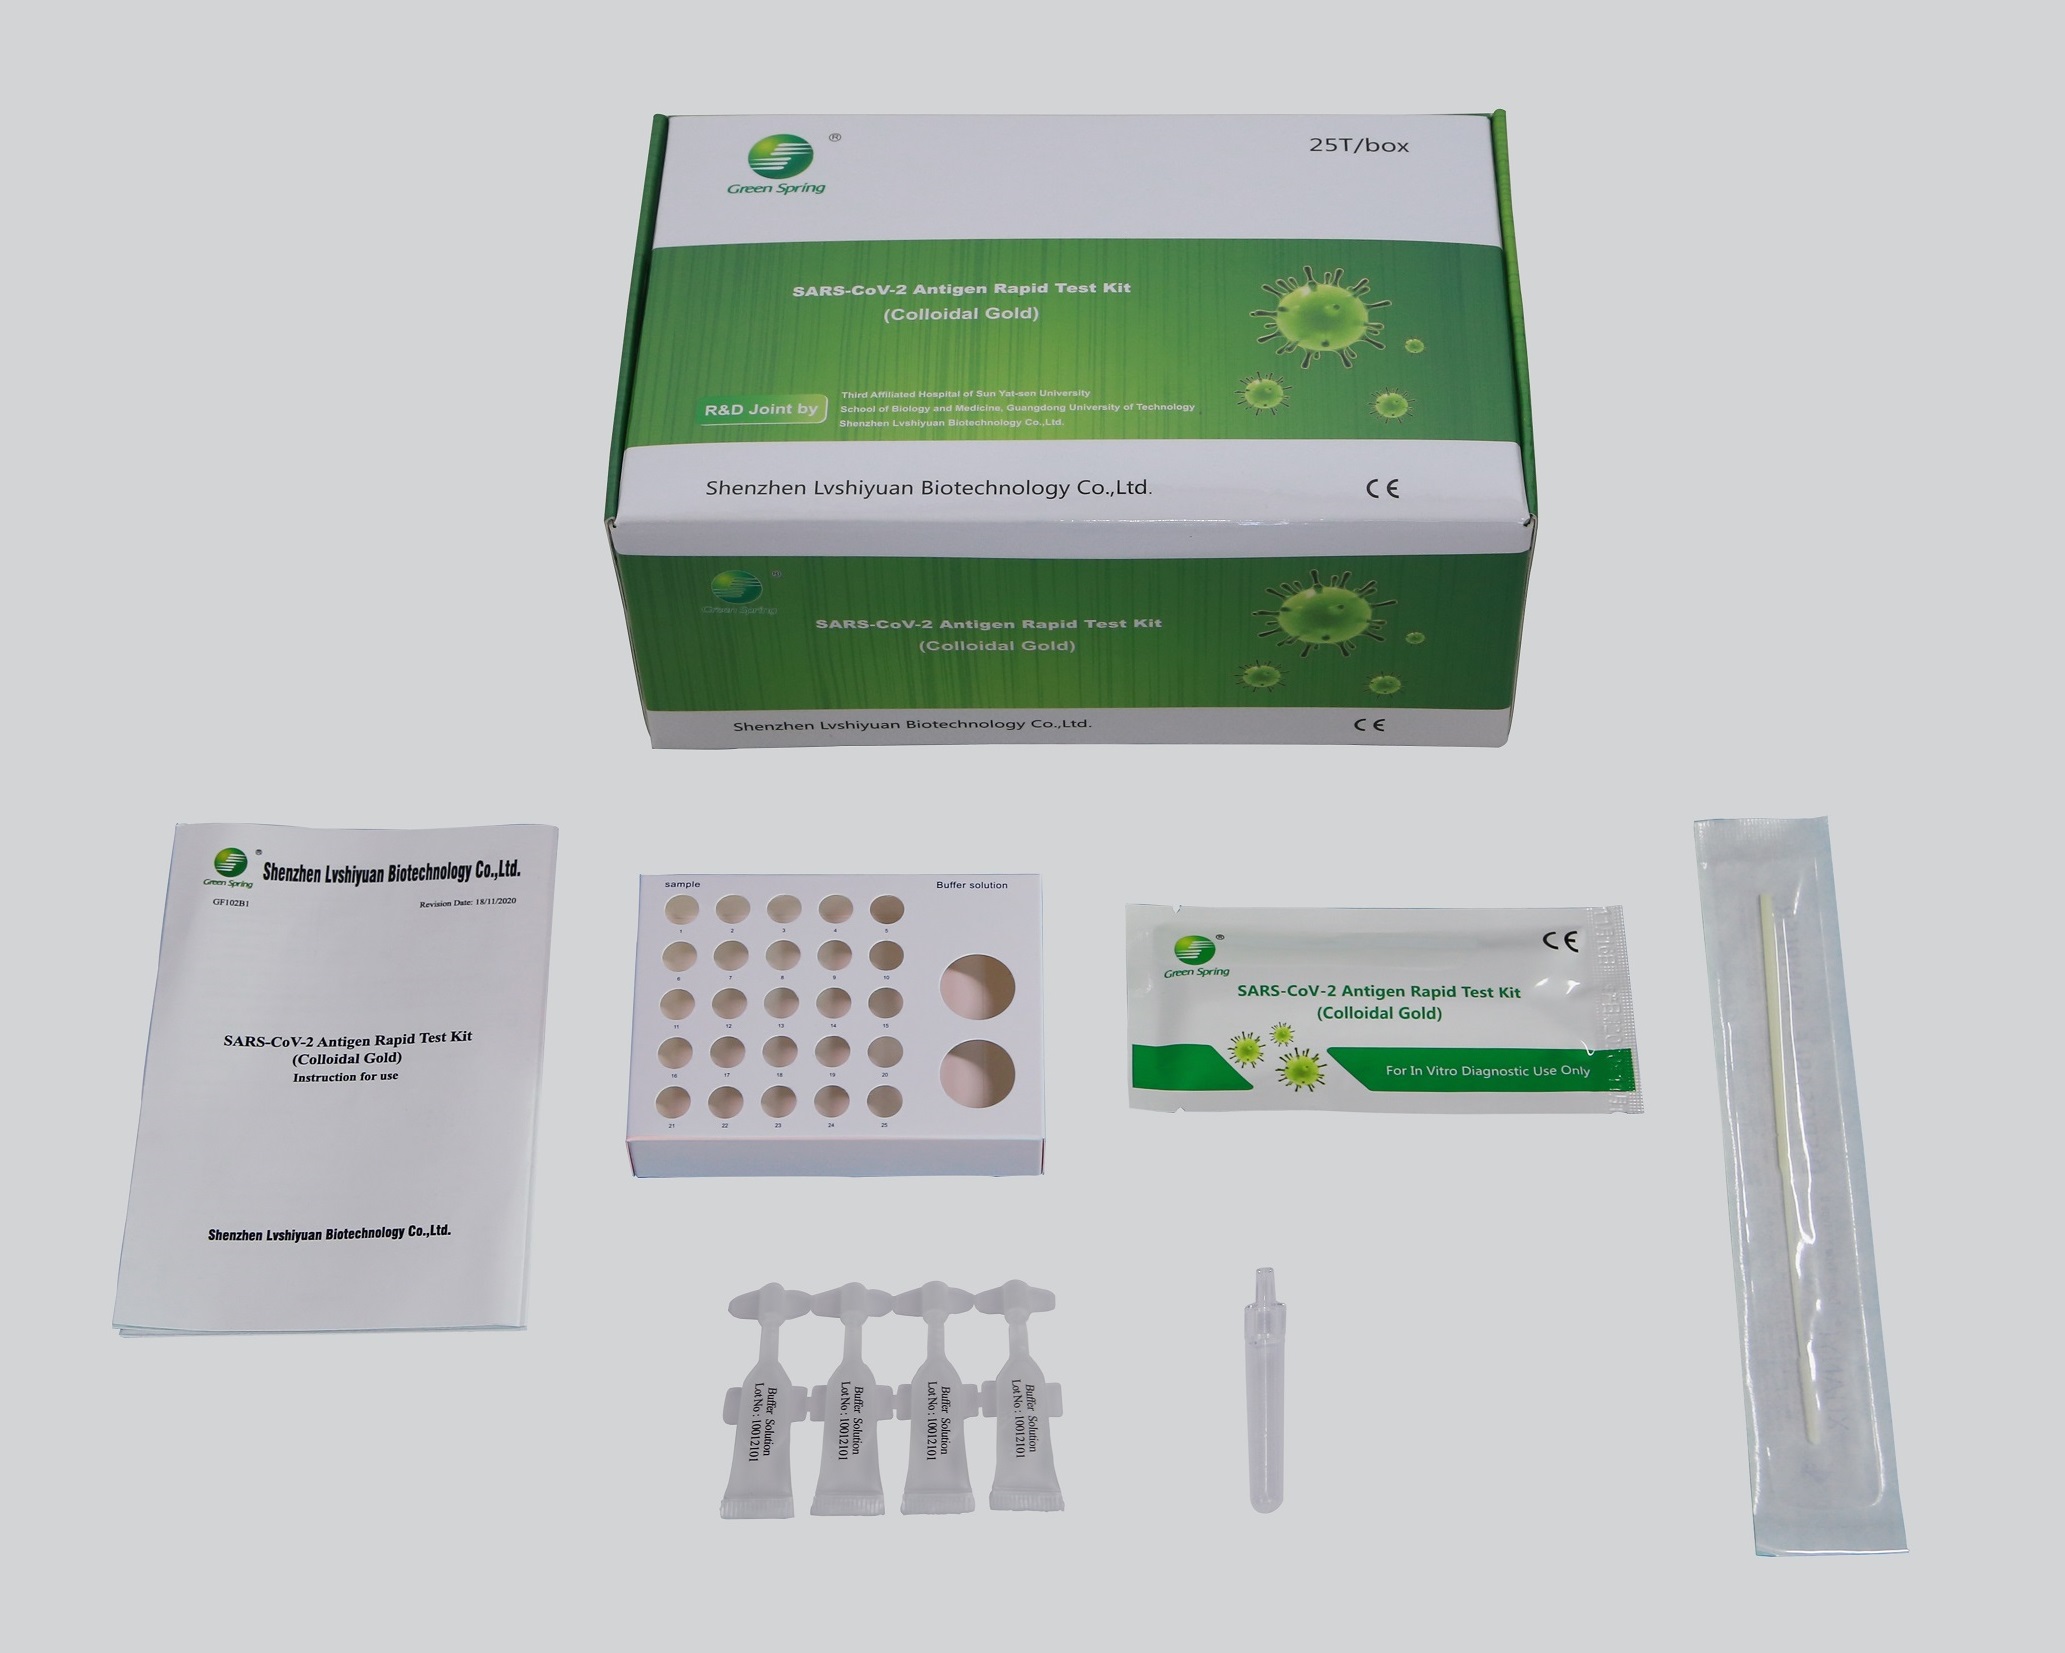 

25 Tests COVID 19 SARS CoV 2 Antigen Rapid Test Kit - FDA EUA Authorized at-Home Self-Test, Results in 20 Minutes with Non-invasive Nasal Swab & No Discomfort Easy to Use